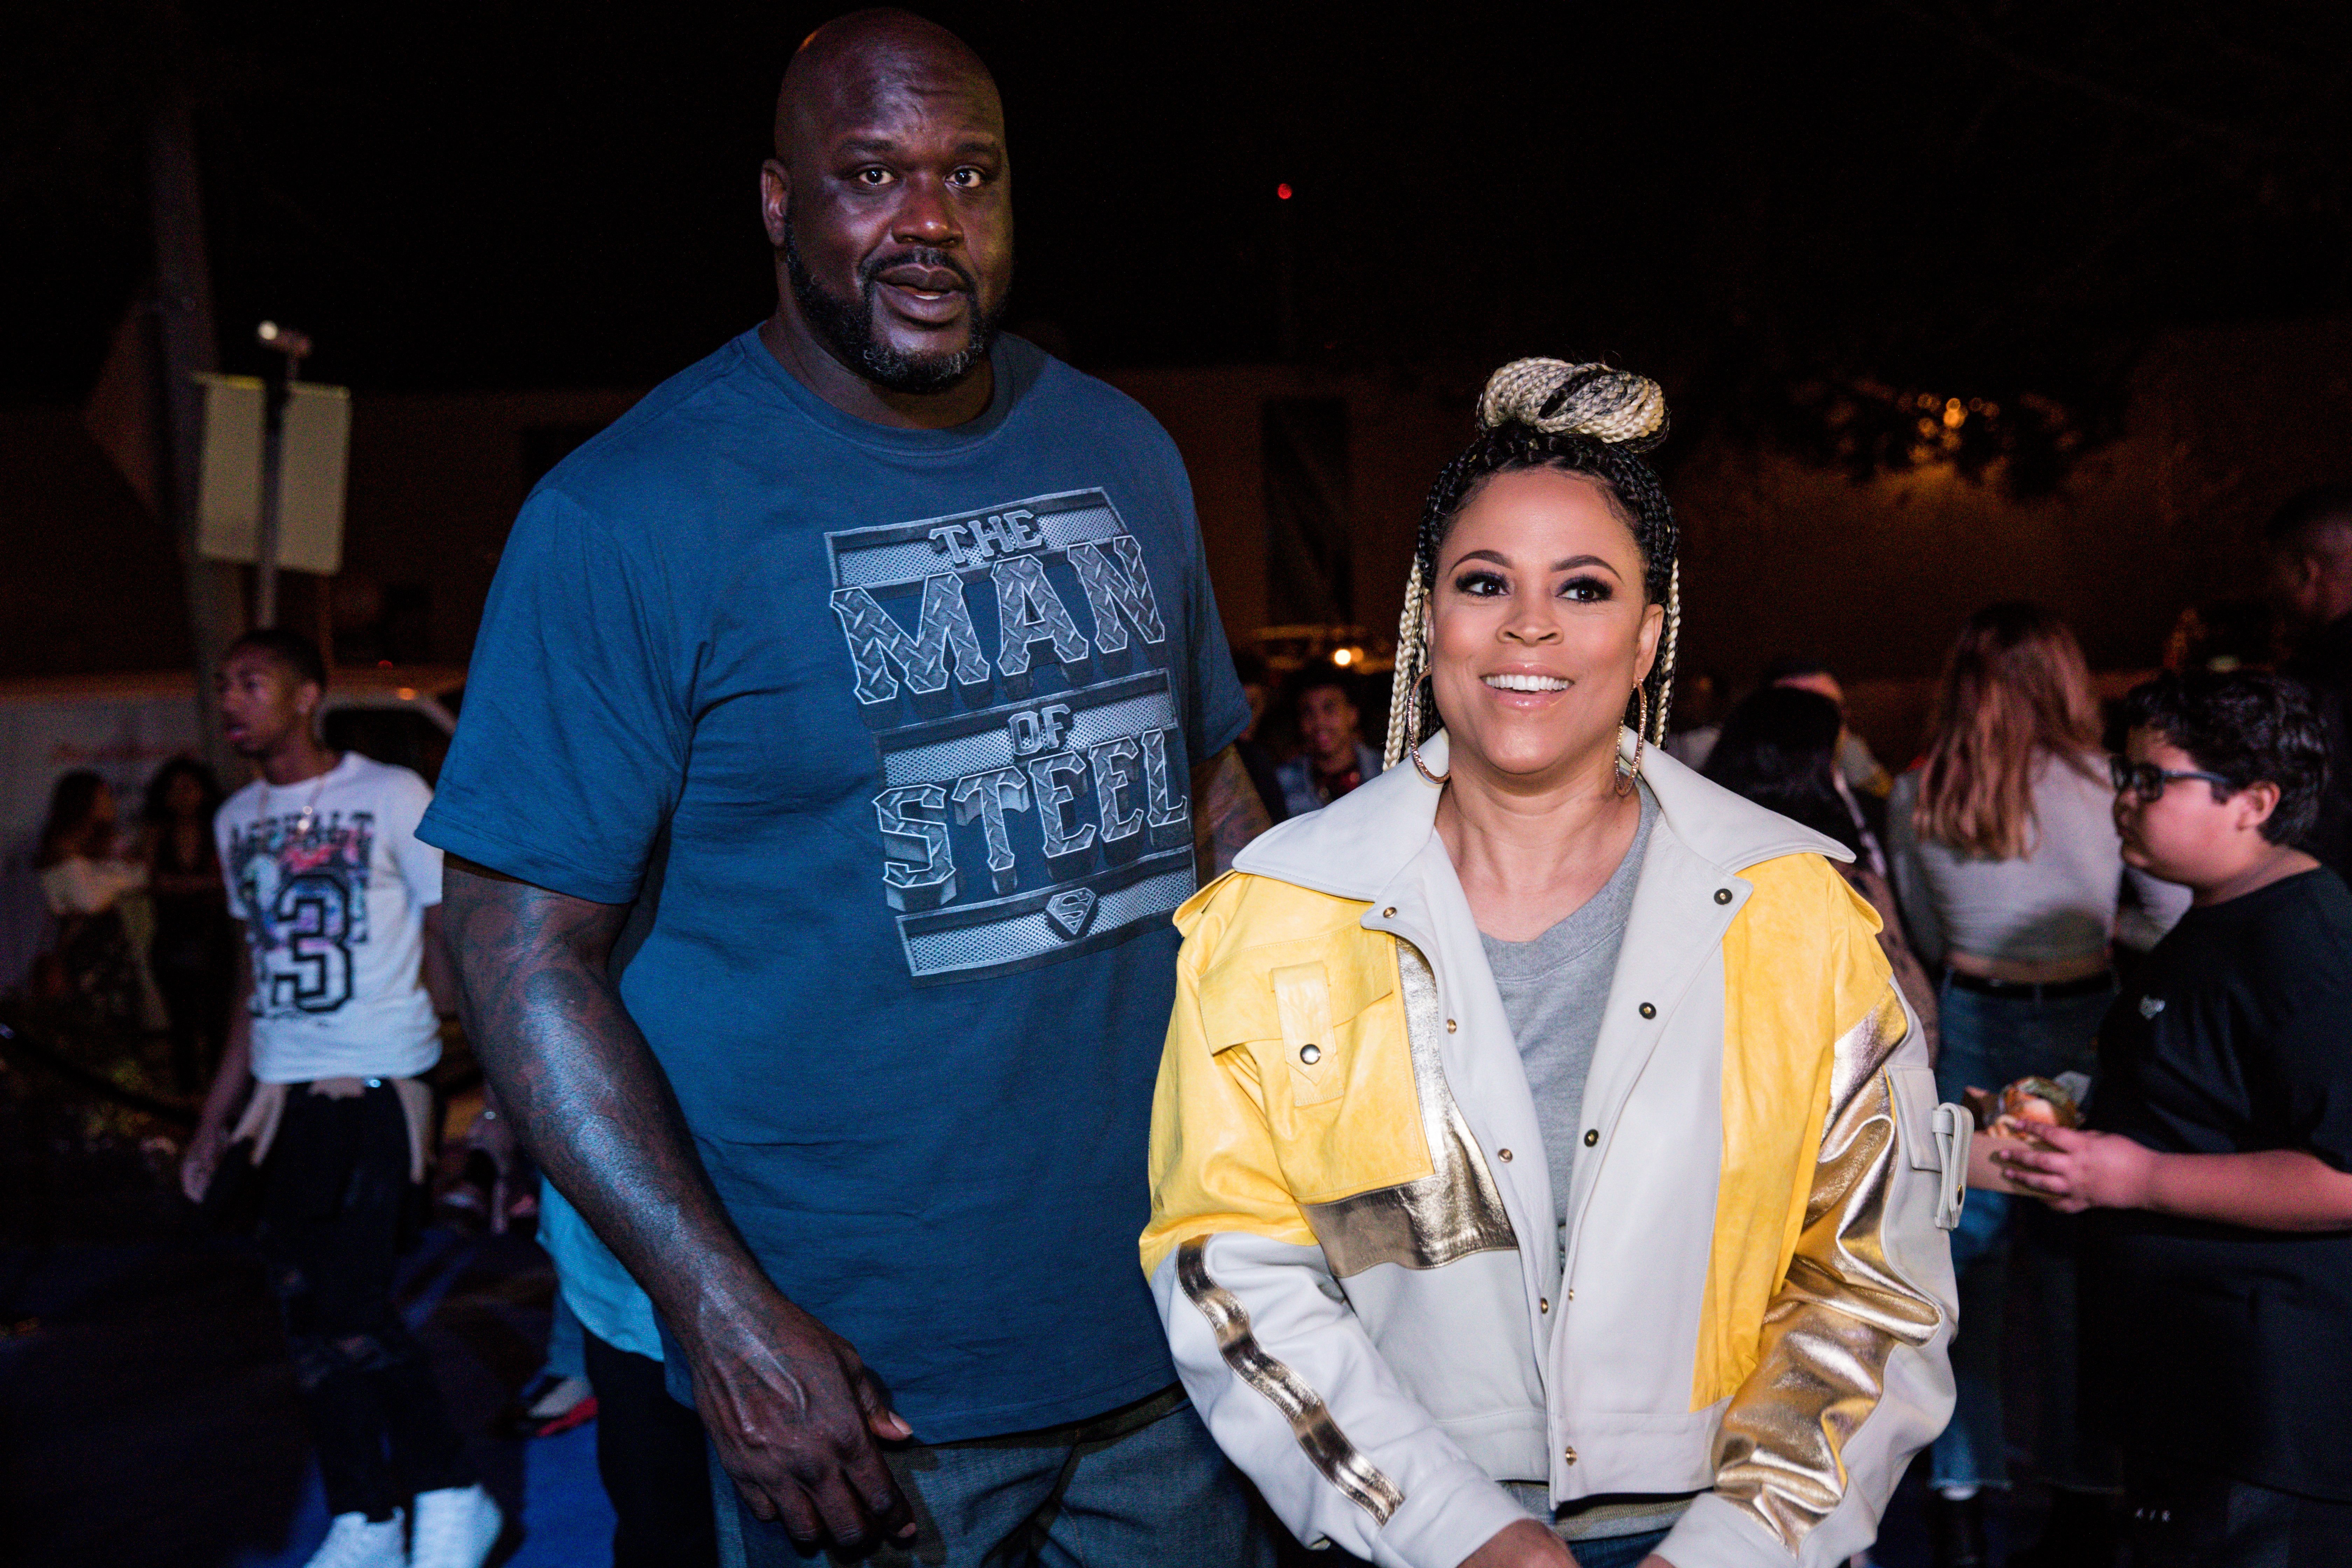 Shaquille & Shaunie O’Neal at their son Shareef’s 18th birthday party on January 13, 2018 in California | Photo: Getty Images